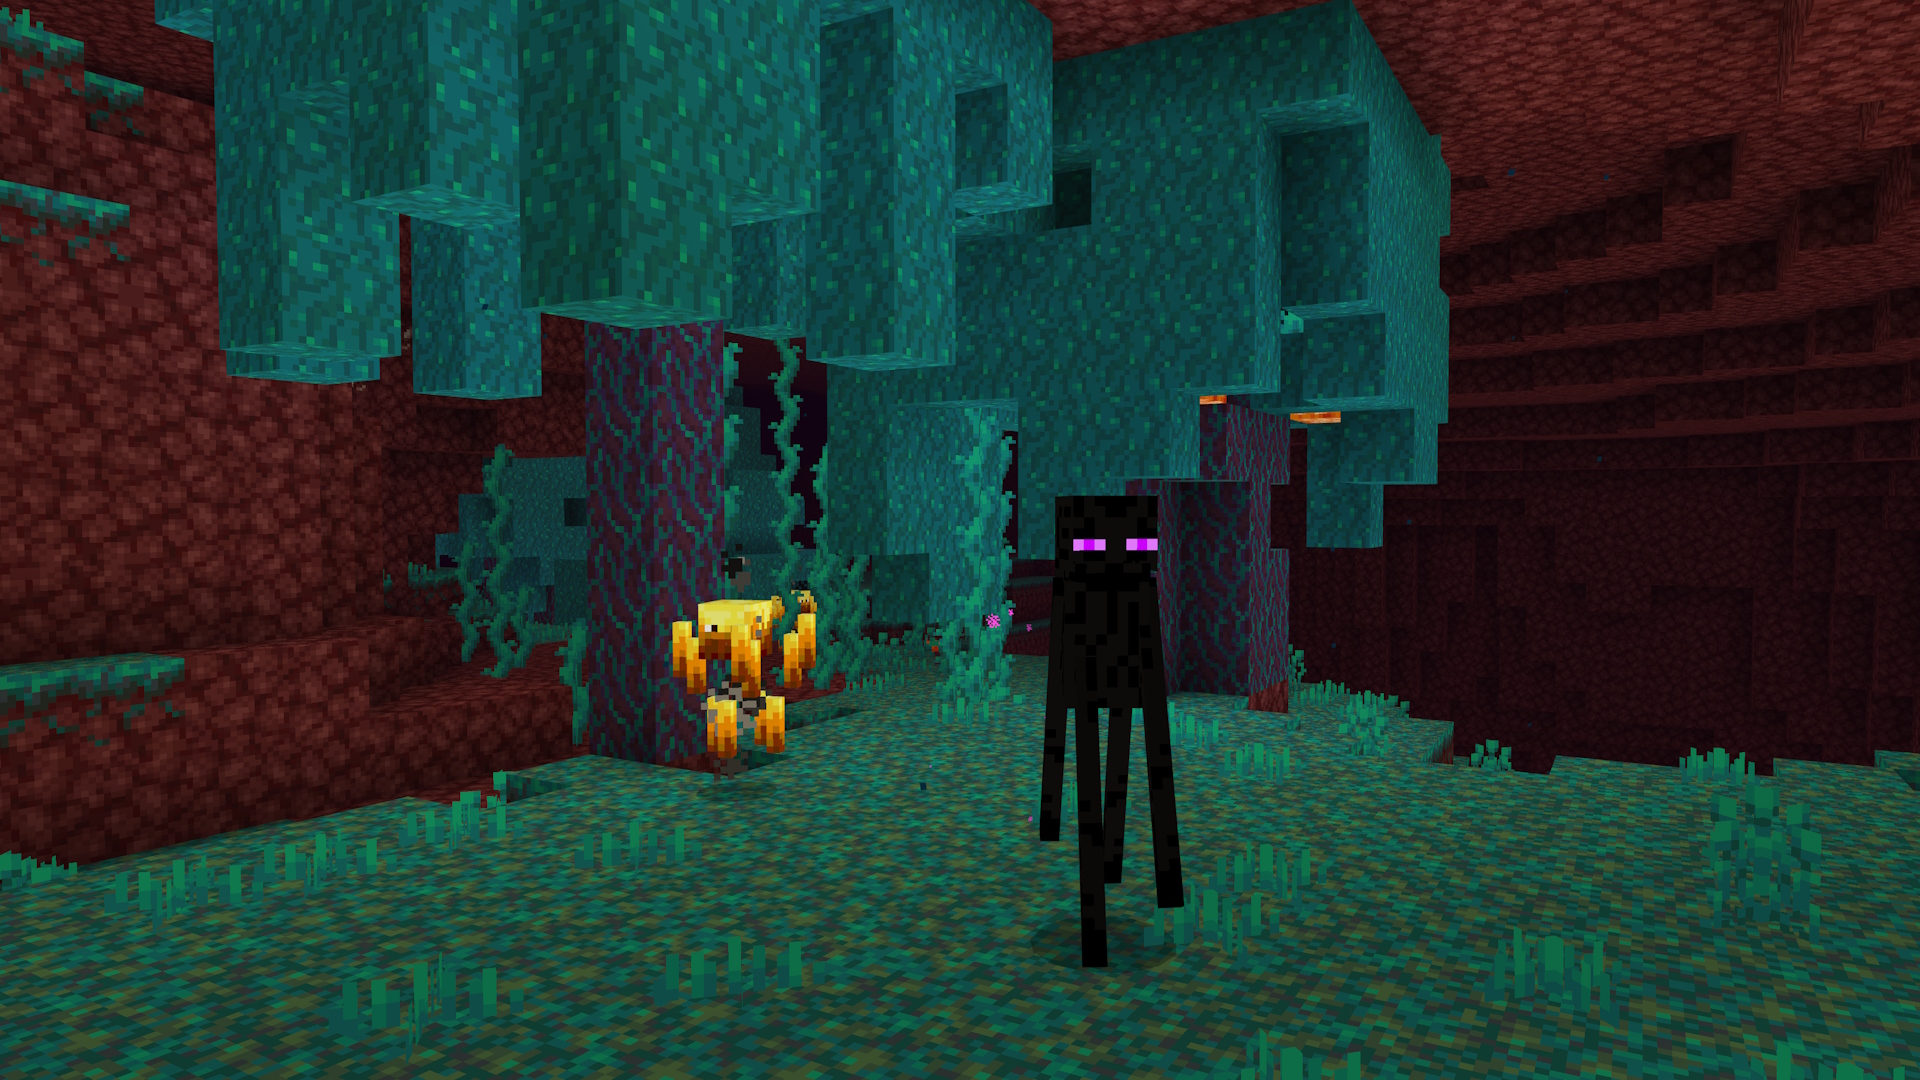 A blaze and an enderman standing in a warped forest in the nether dimension.